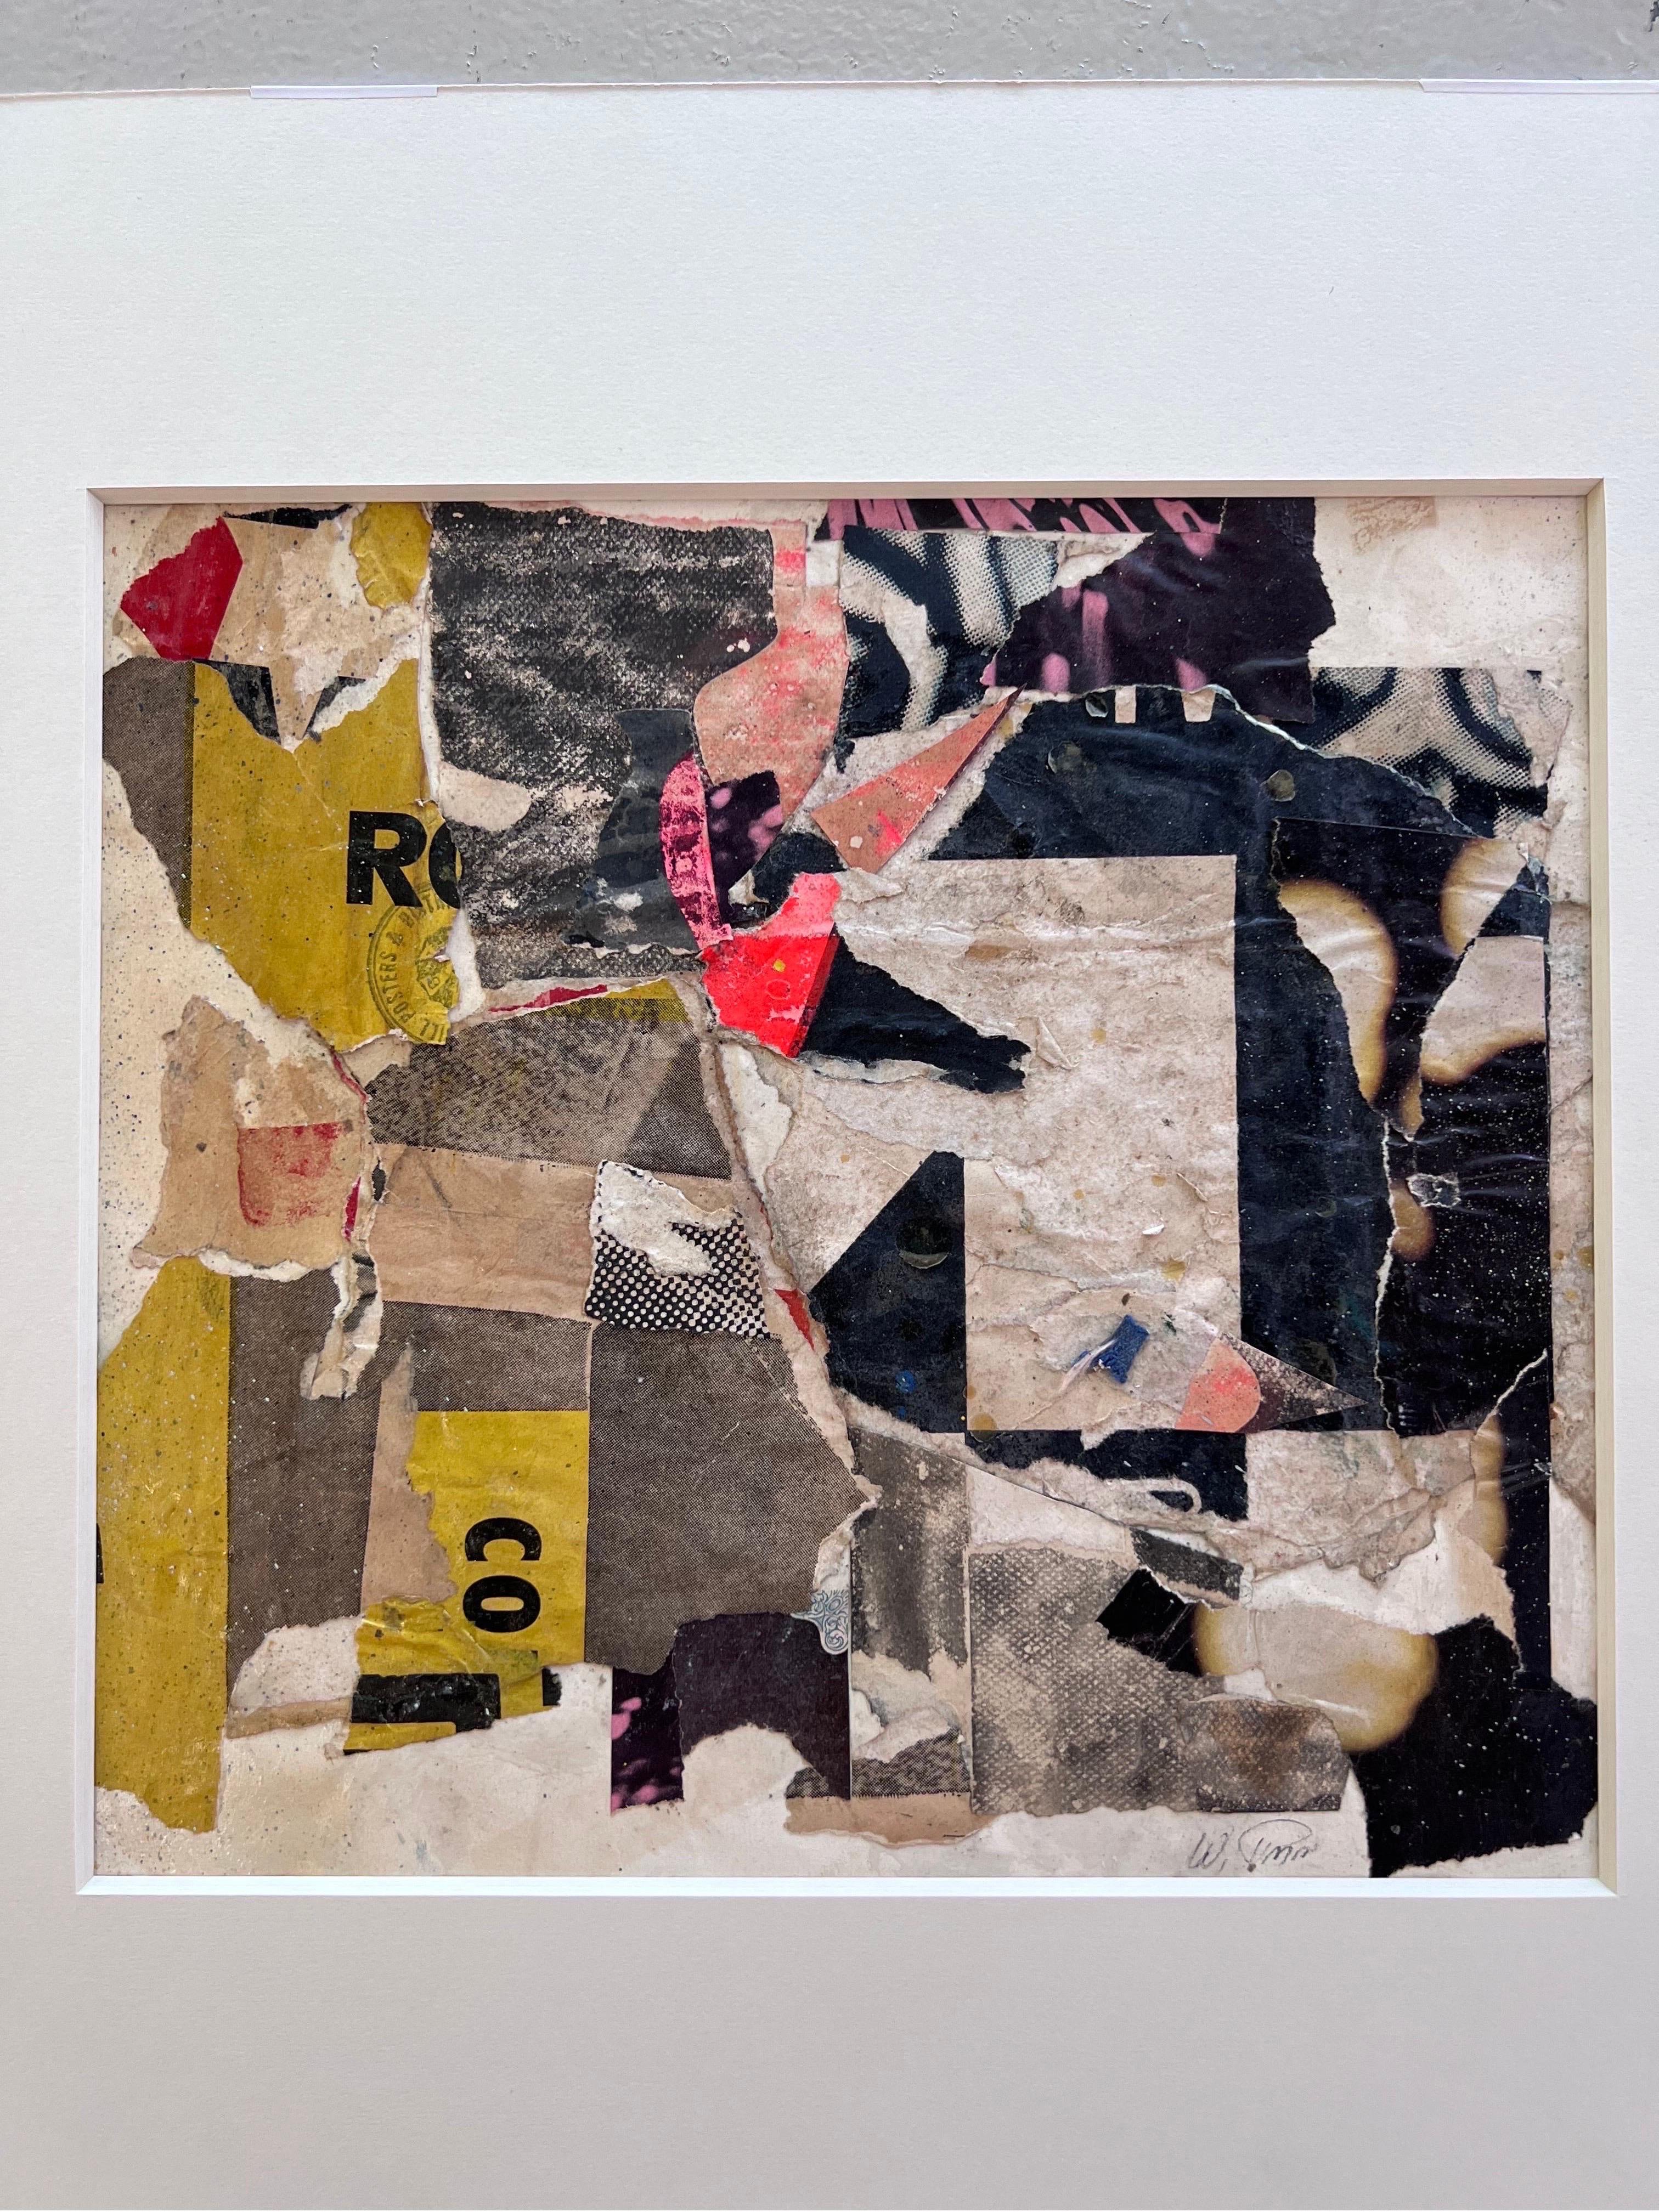 Vintage Paper and Adhesive collage by Wayne Timm. (Mat opening) or Image measures 11 3/4 x 12.5 in. 

In the 1960's, Wayne Timm rubbed elbows with the likes of Warhol, Lichtenstein, Rauchenburg and many others, in the time he had an Art studio loft